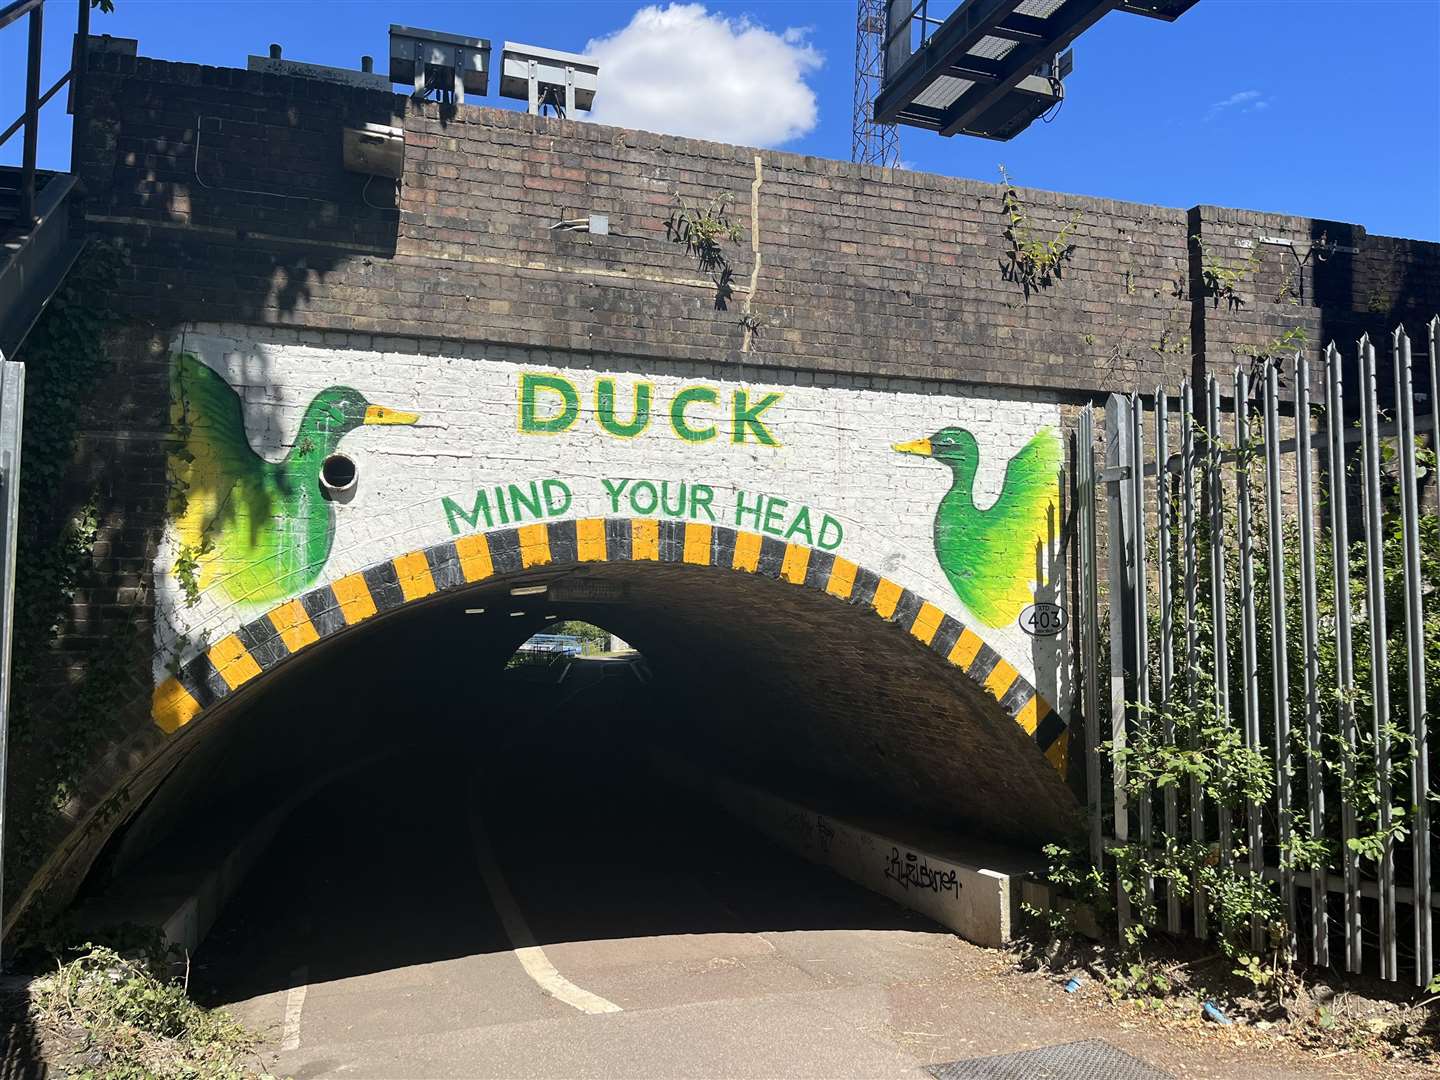 The underpass between Ashford International and the Designer Outlet was painted in 2019